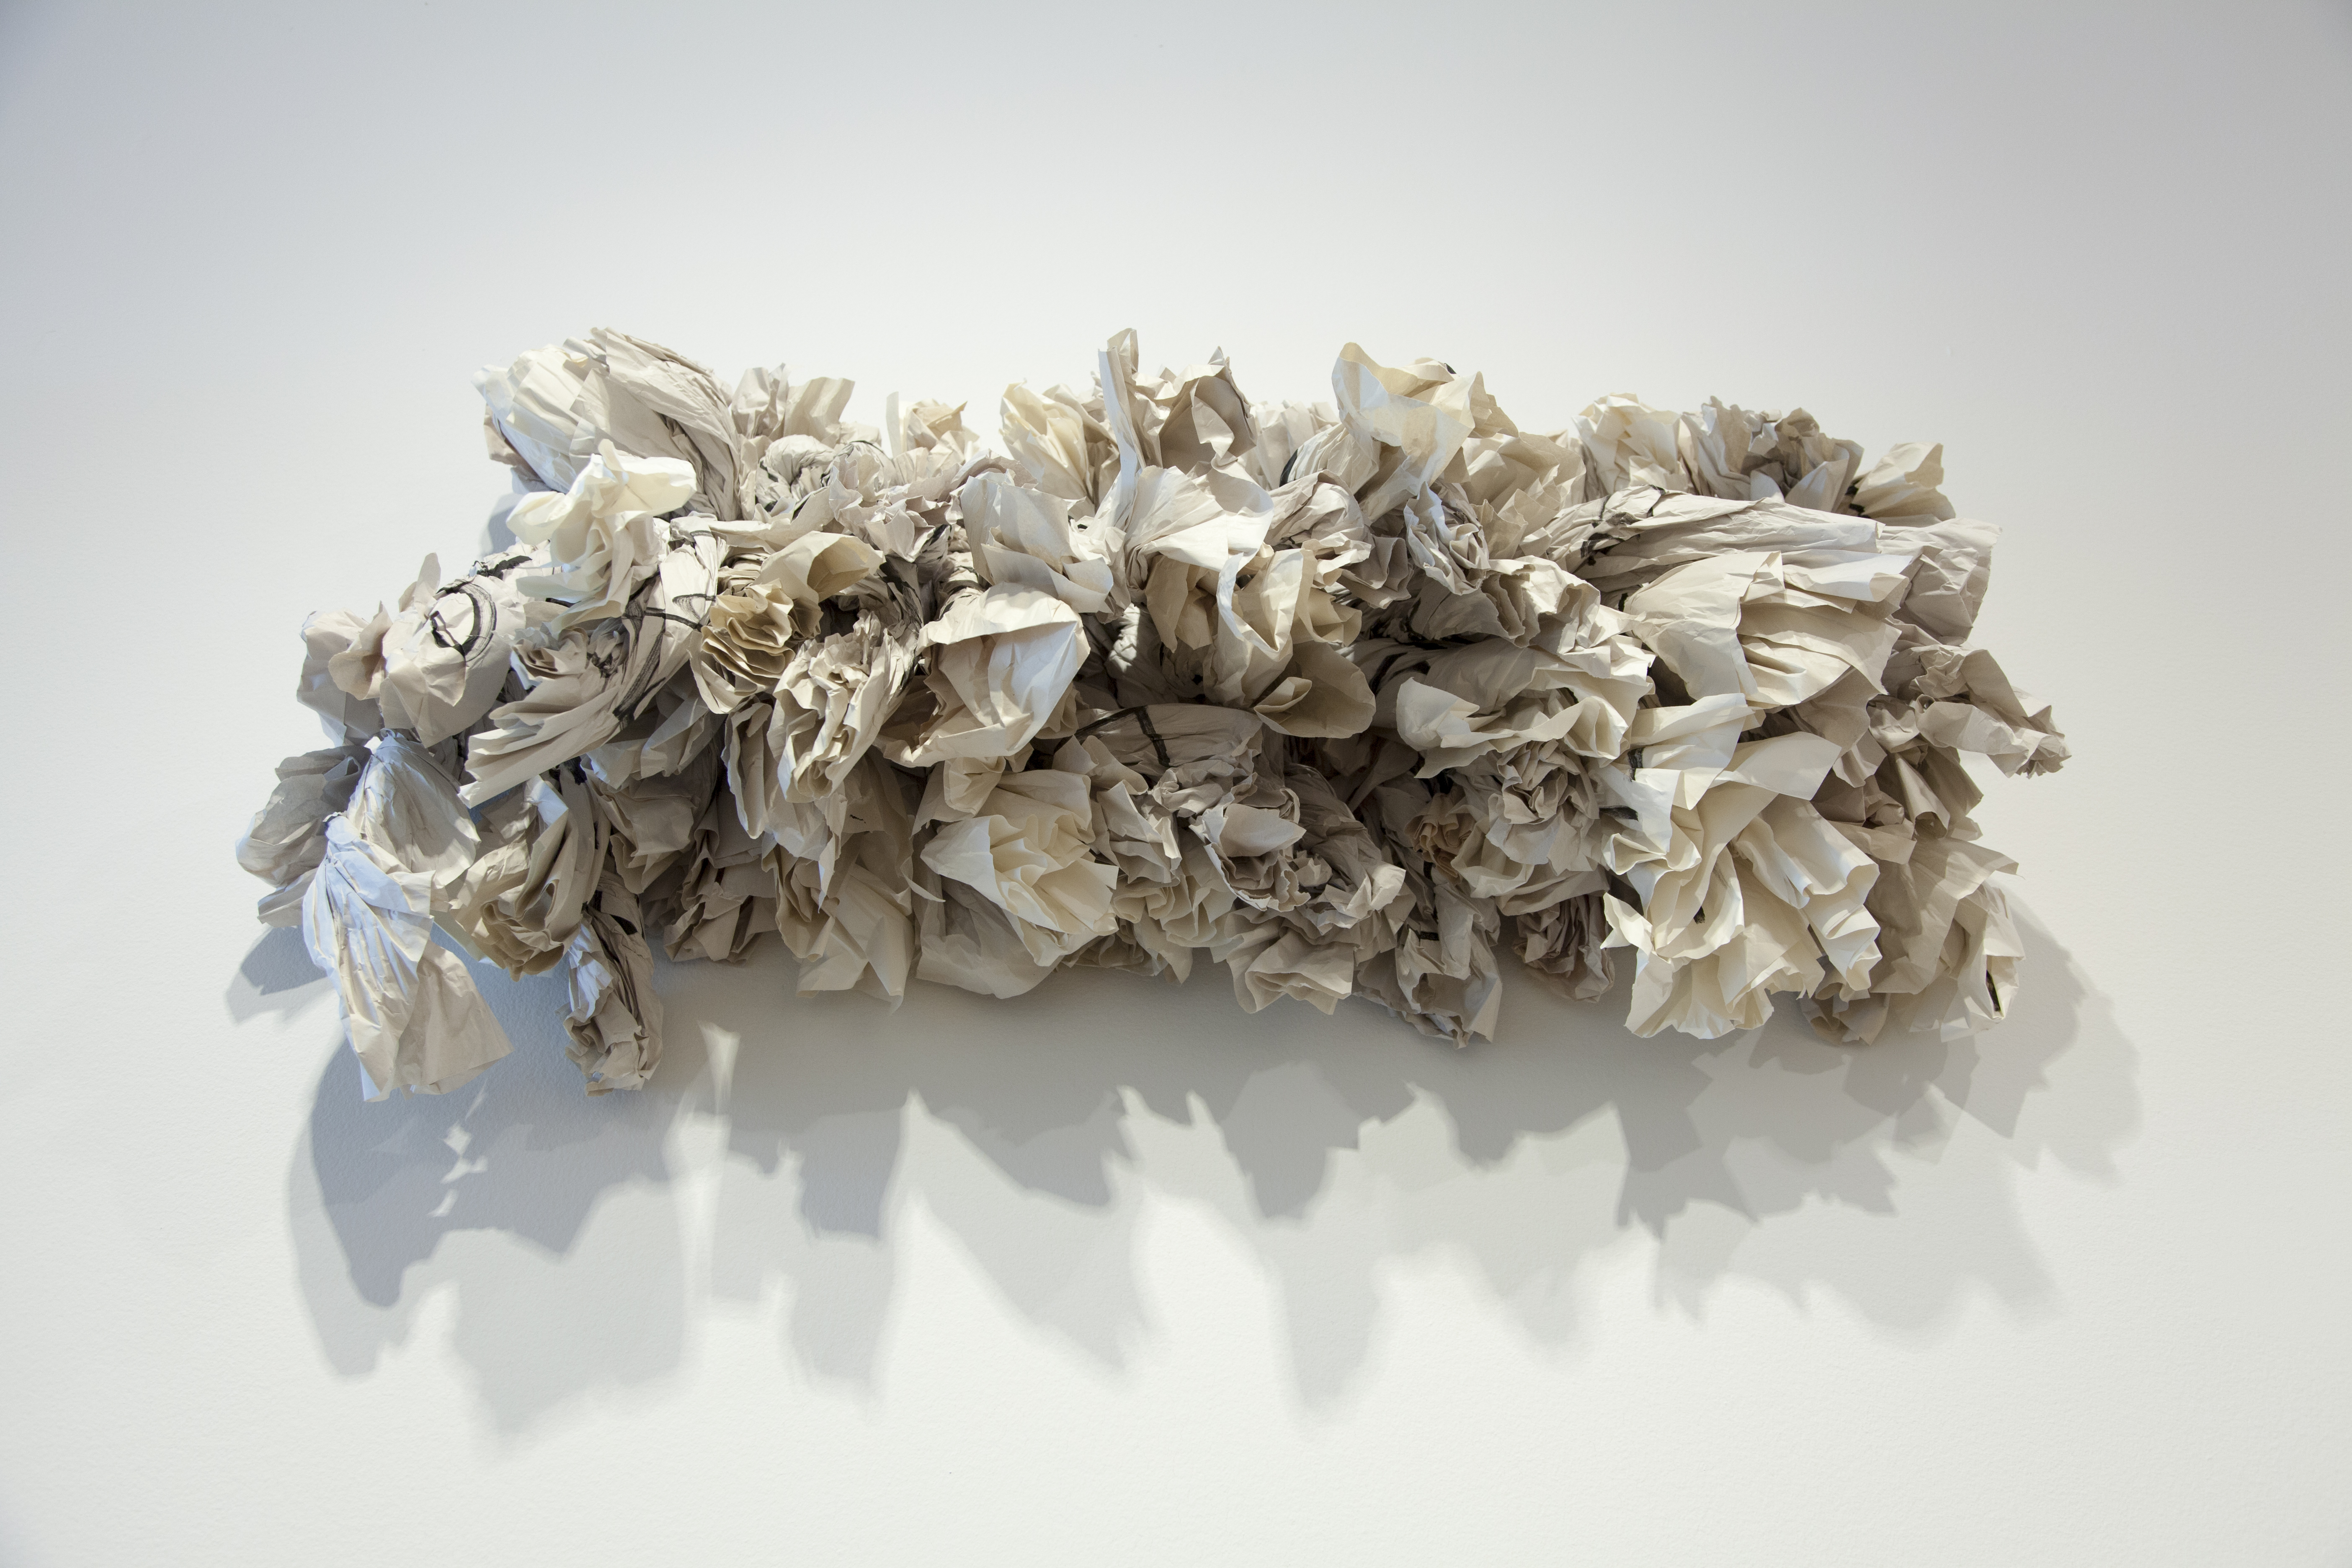 Image: Maren Hassinger, Fight the Power, 2016 [installation view]. A panel of tightly rolled papers extending from the wall. Image courtesy of DePaul Art Museum.